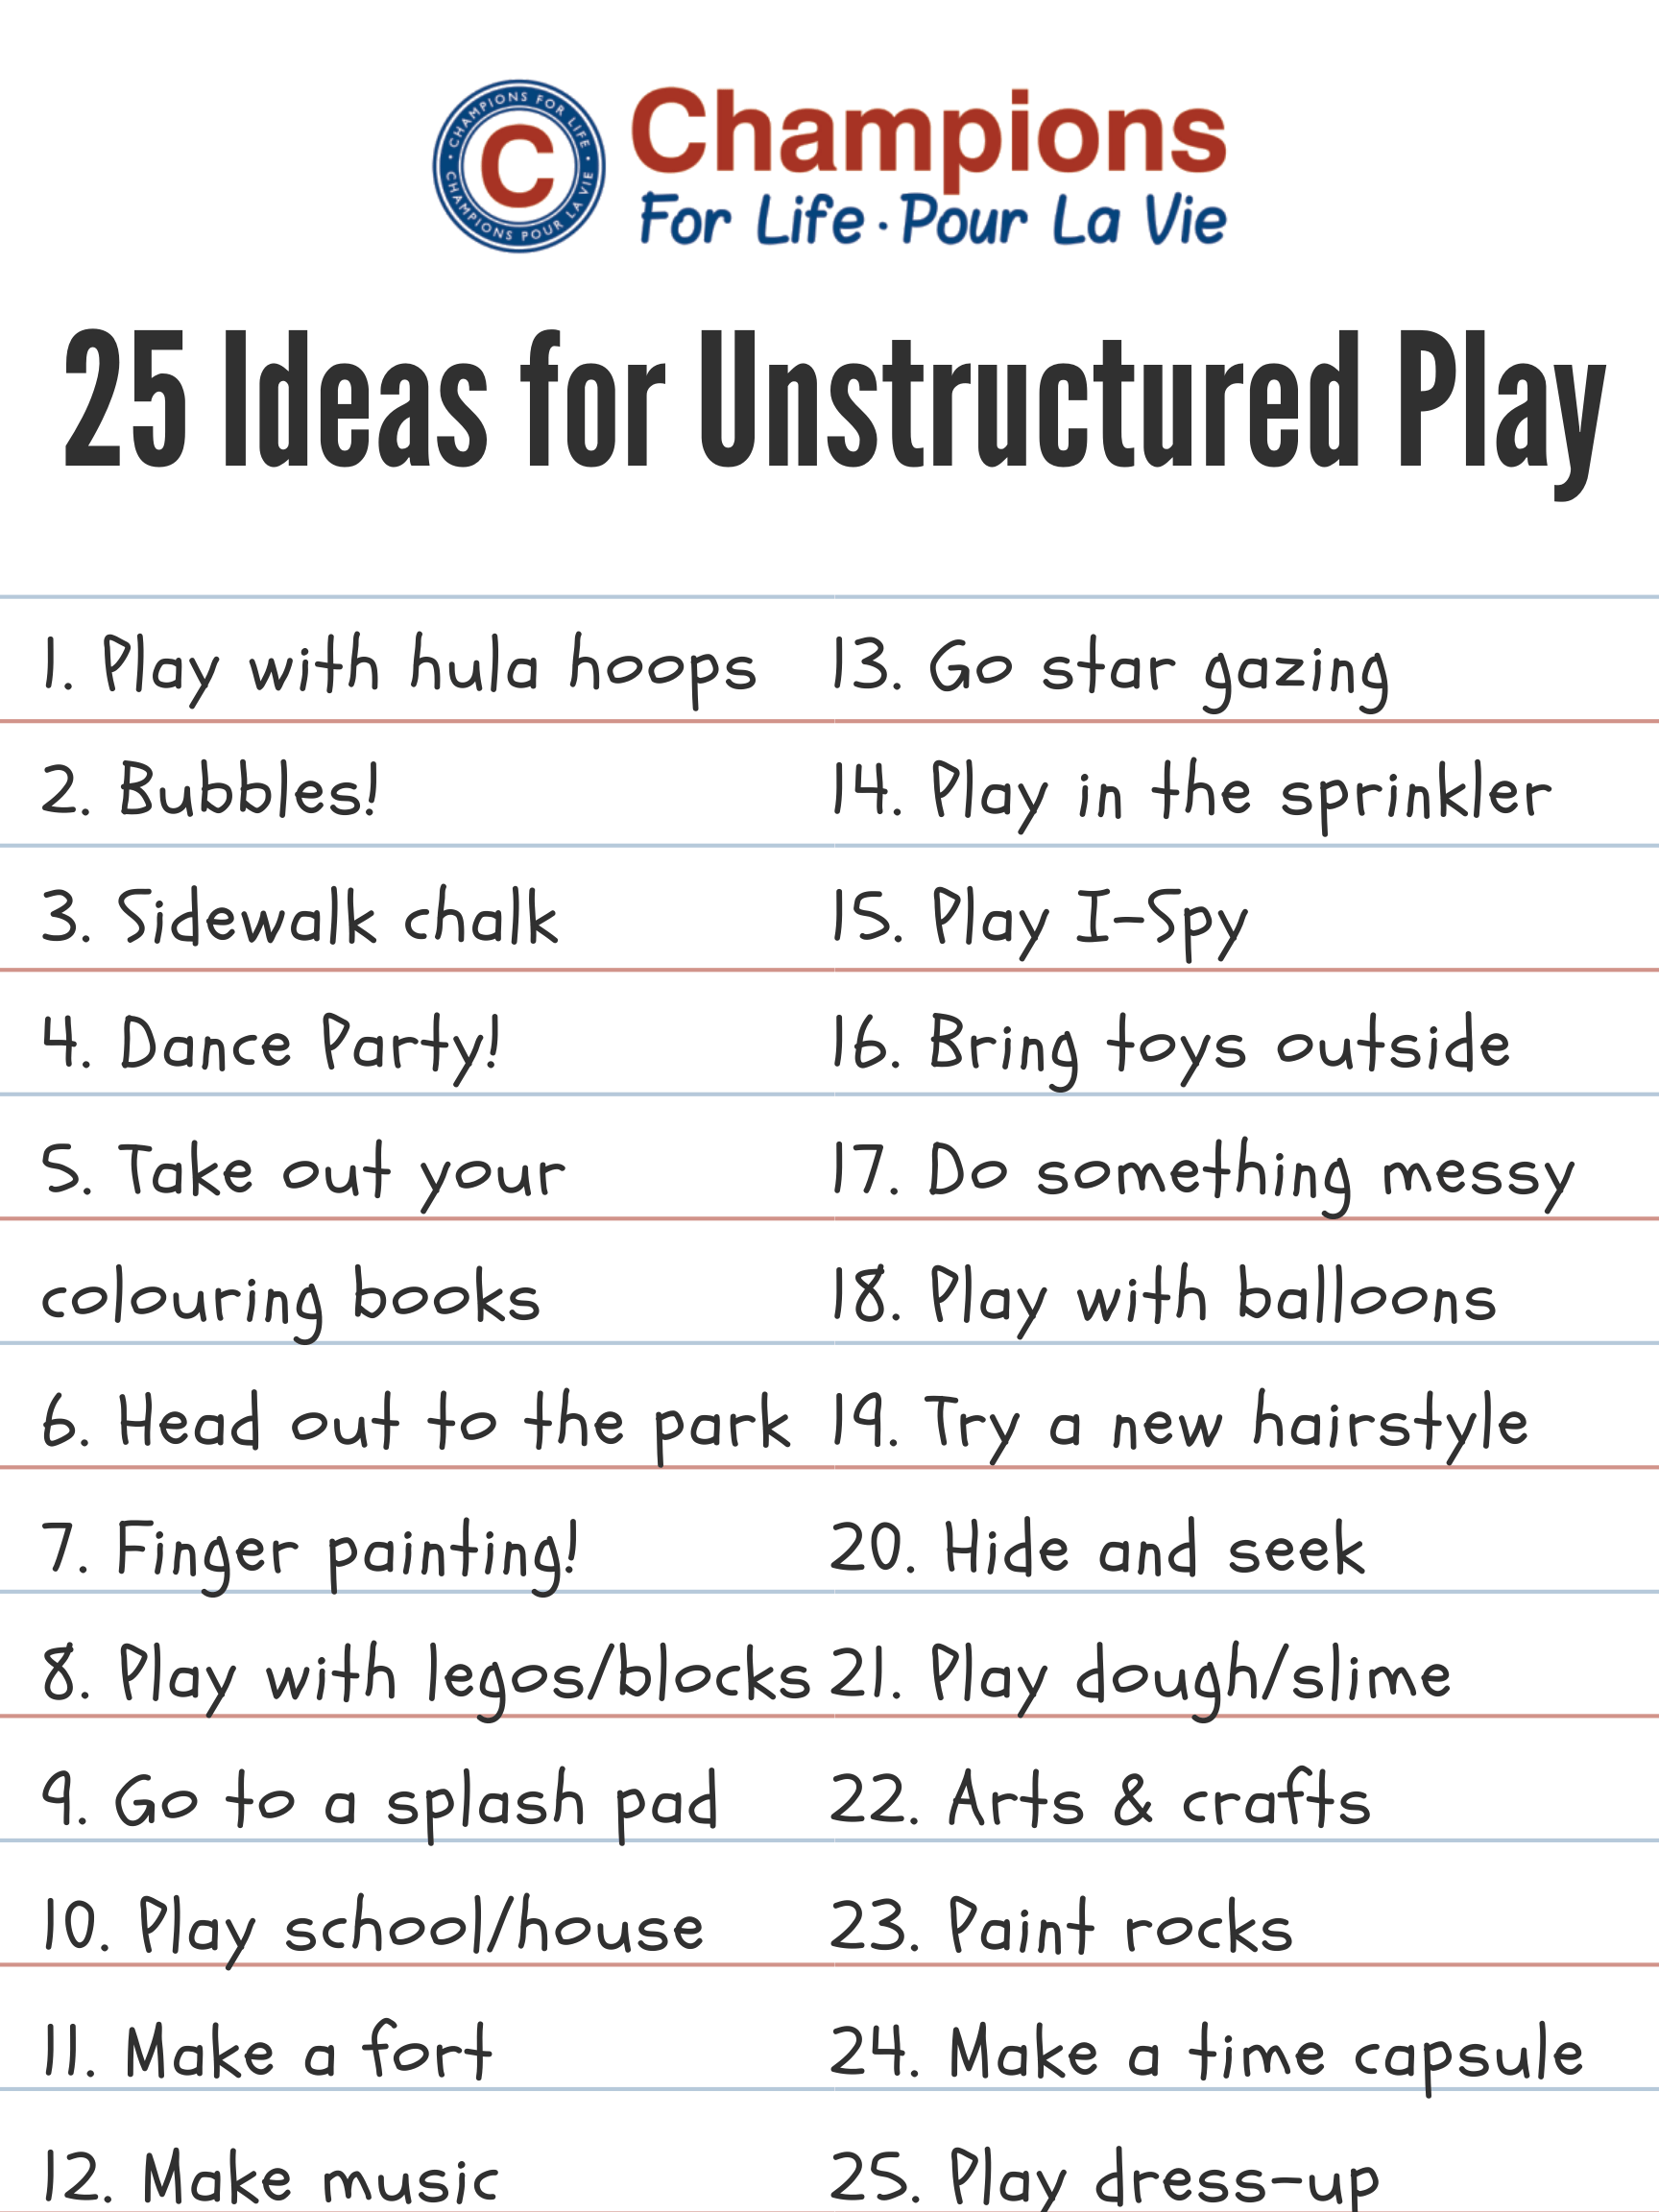 25 Ideas for unstructured play